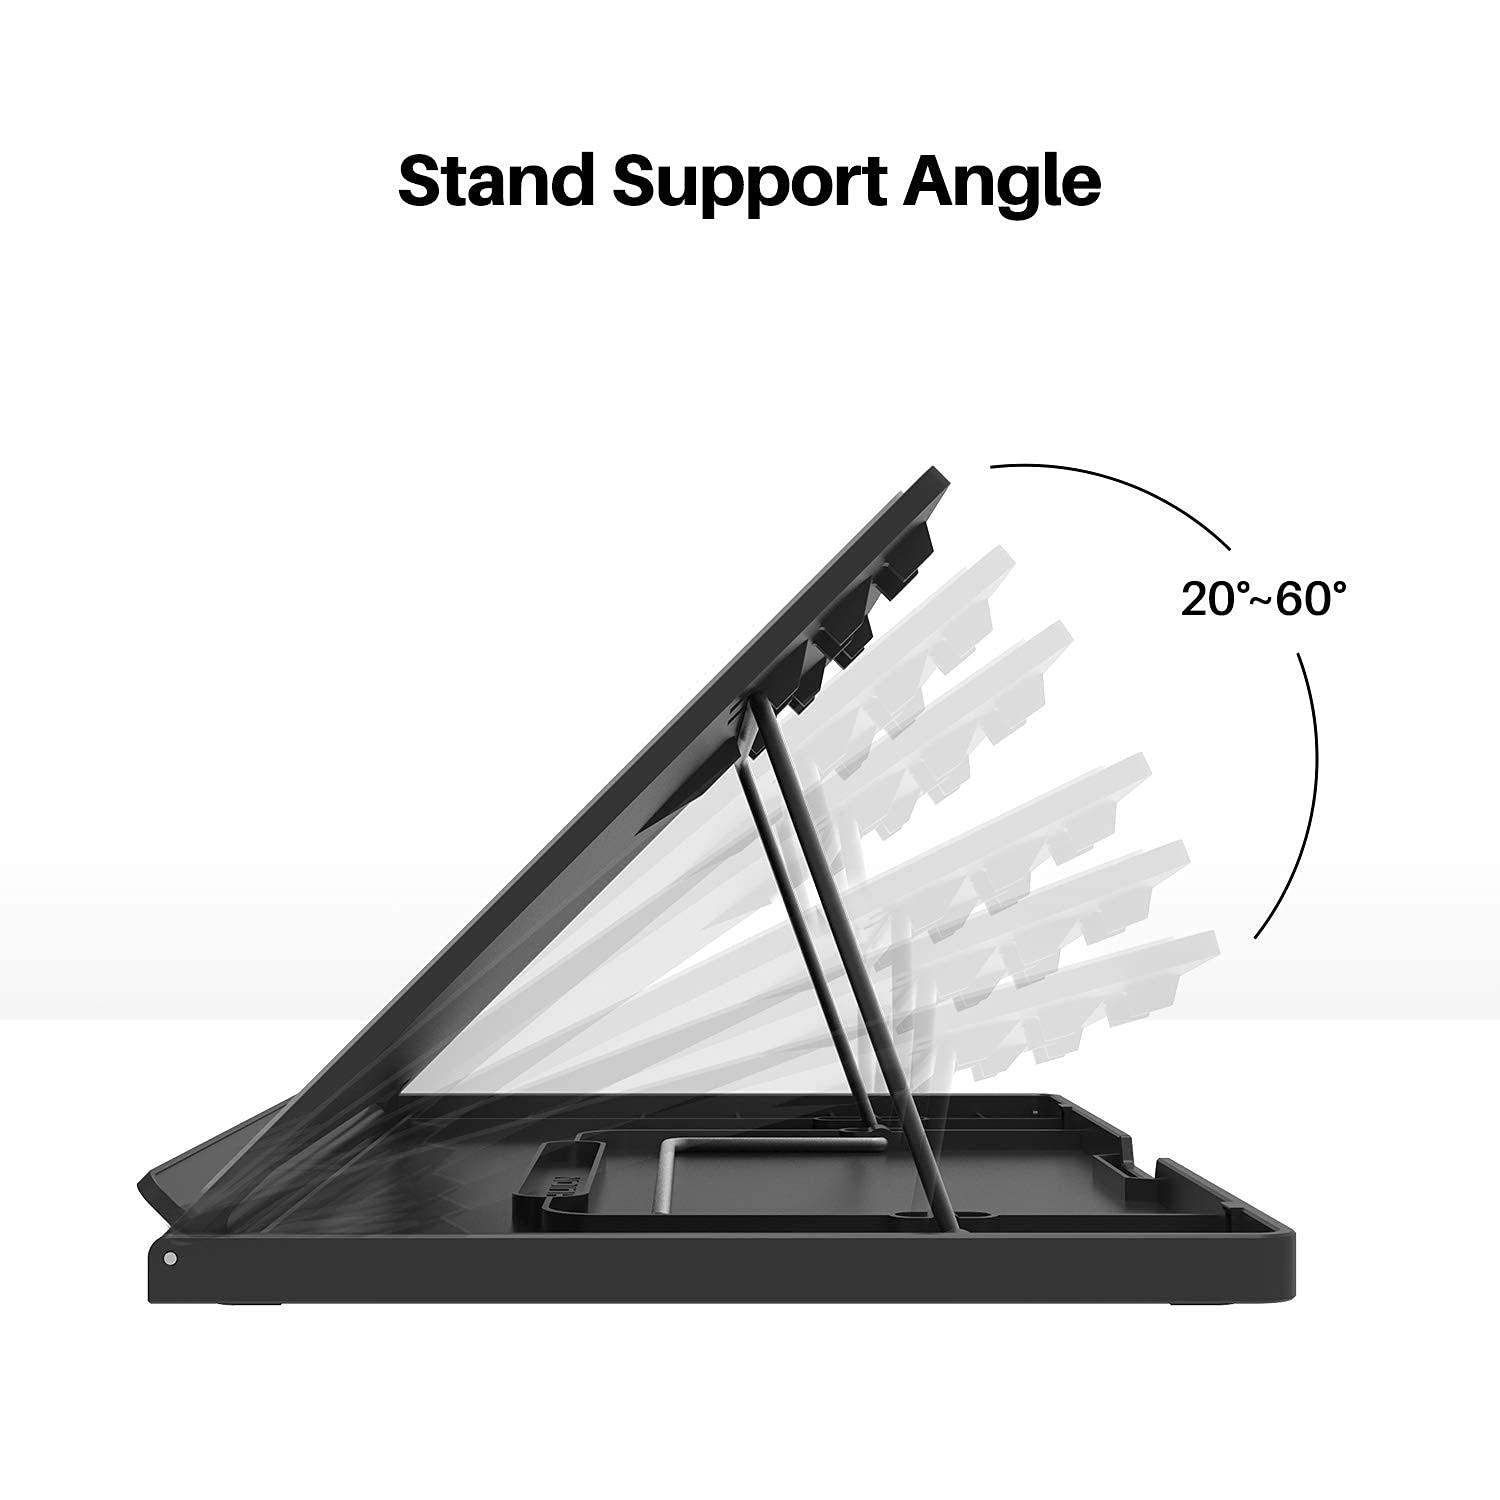 2021 HUION KAMVAS 16 Graphics Drawing Tablet with Full-Laminated Screen Anti-Glare 10 Express Keys Android Support Battery-Free Stylus 8192 Pen Pressure Tilt Adjustable Stand - 15.6 Inch Pen Display